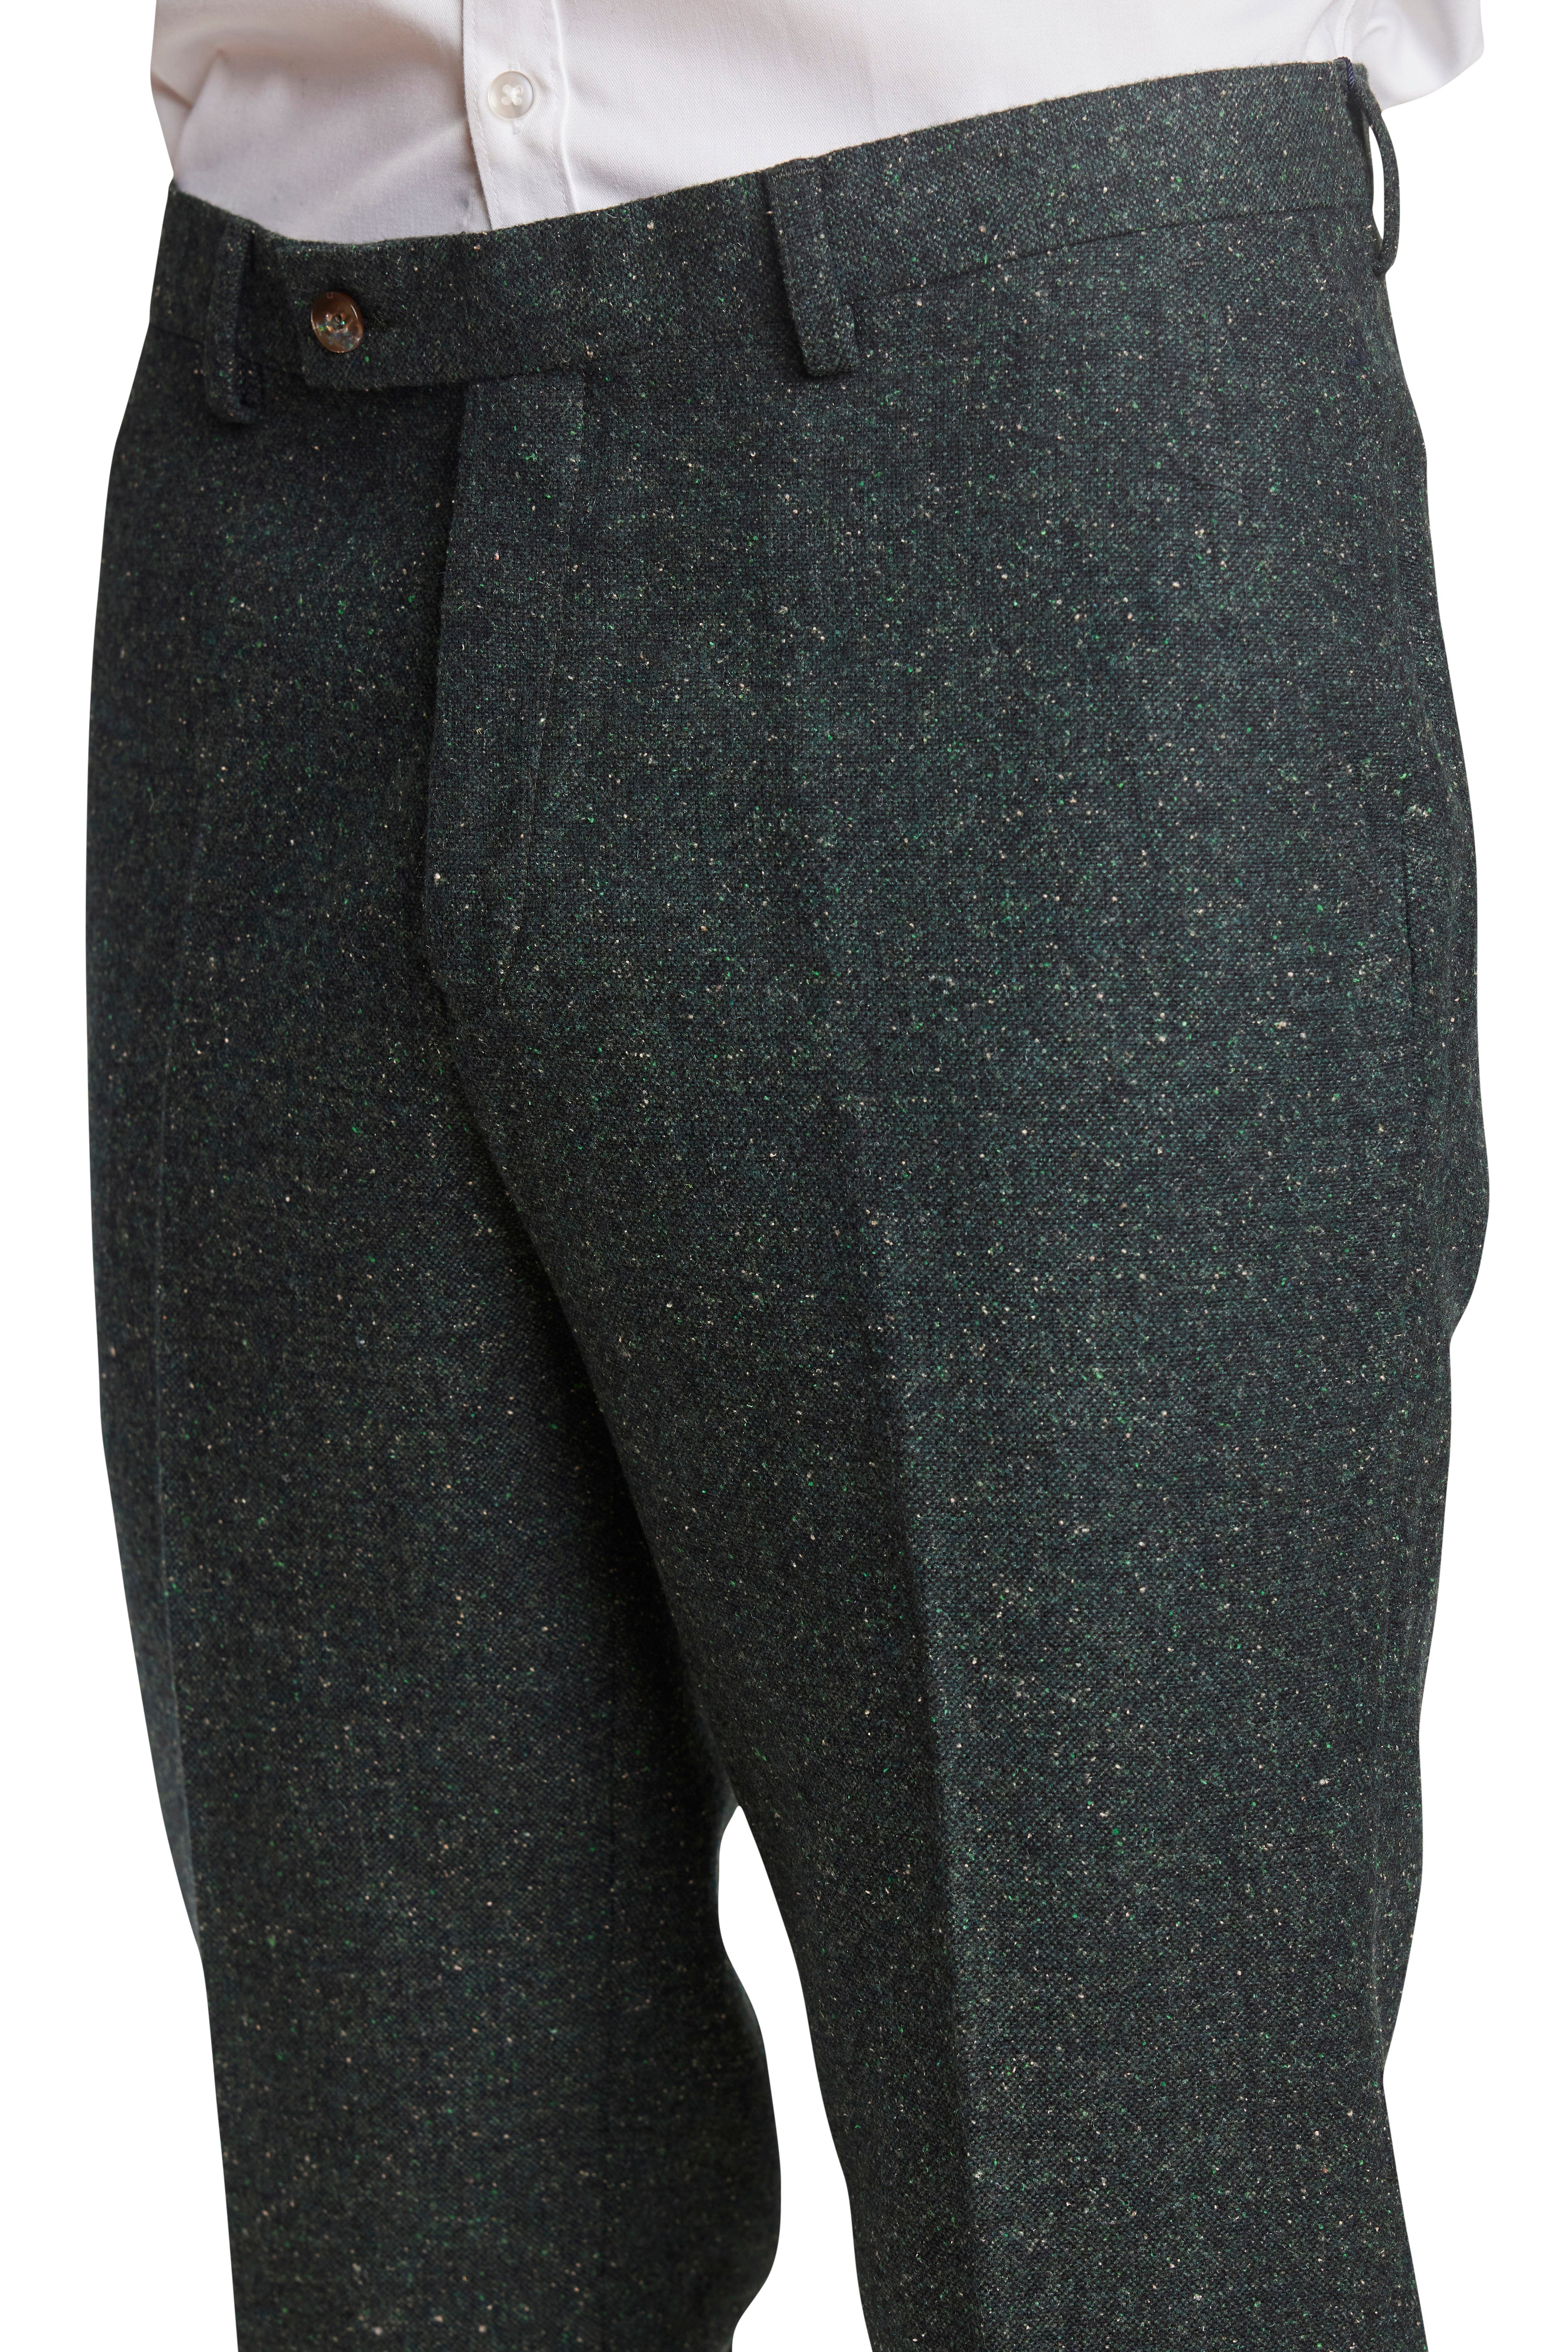 Downing Pants - slim - Forest Speckle